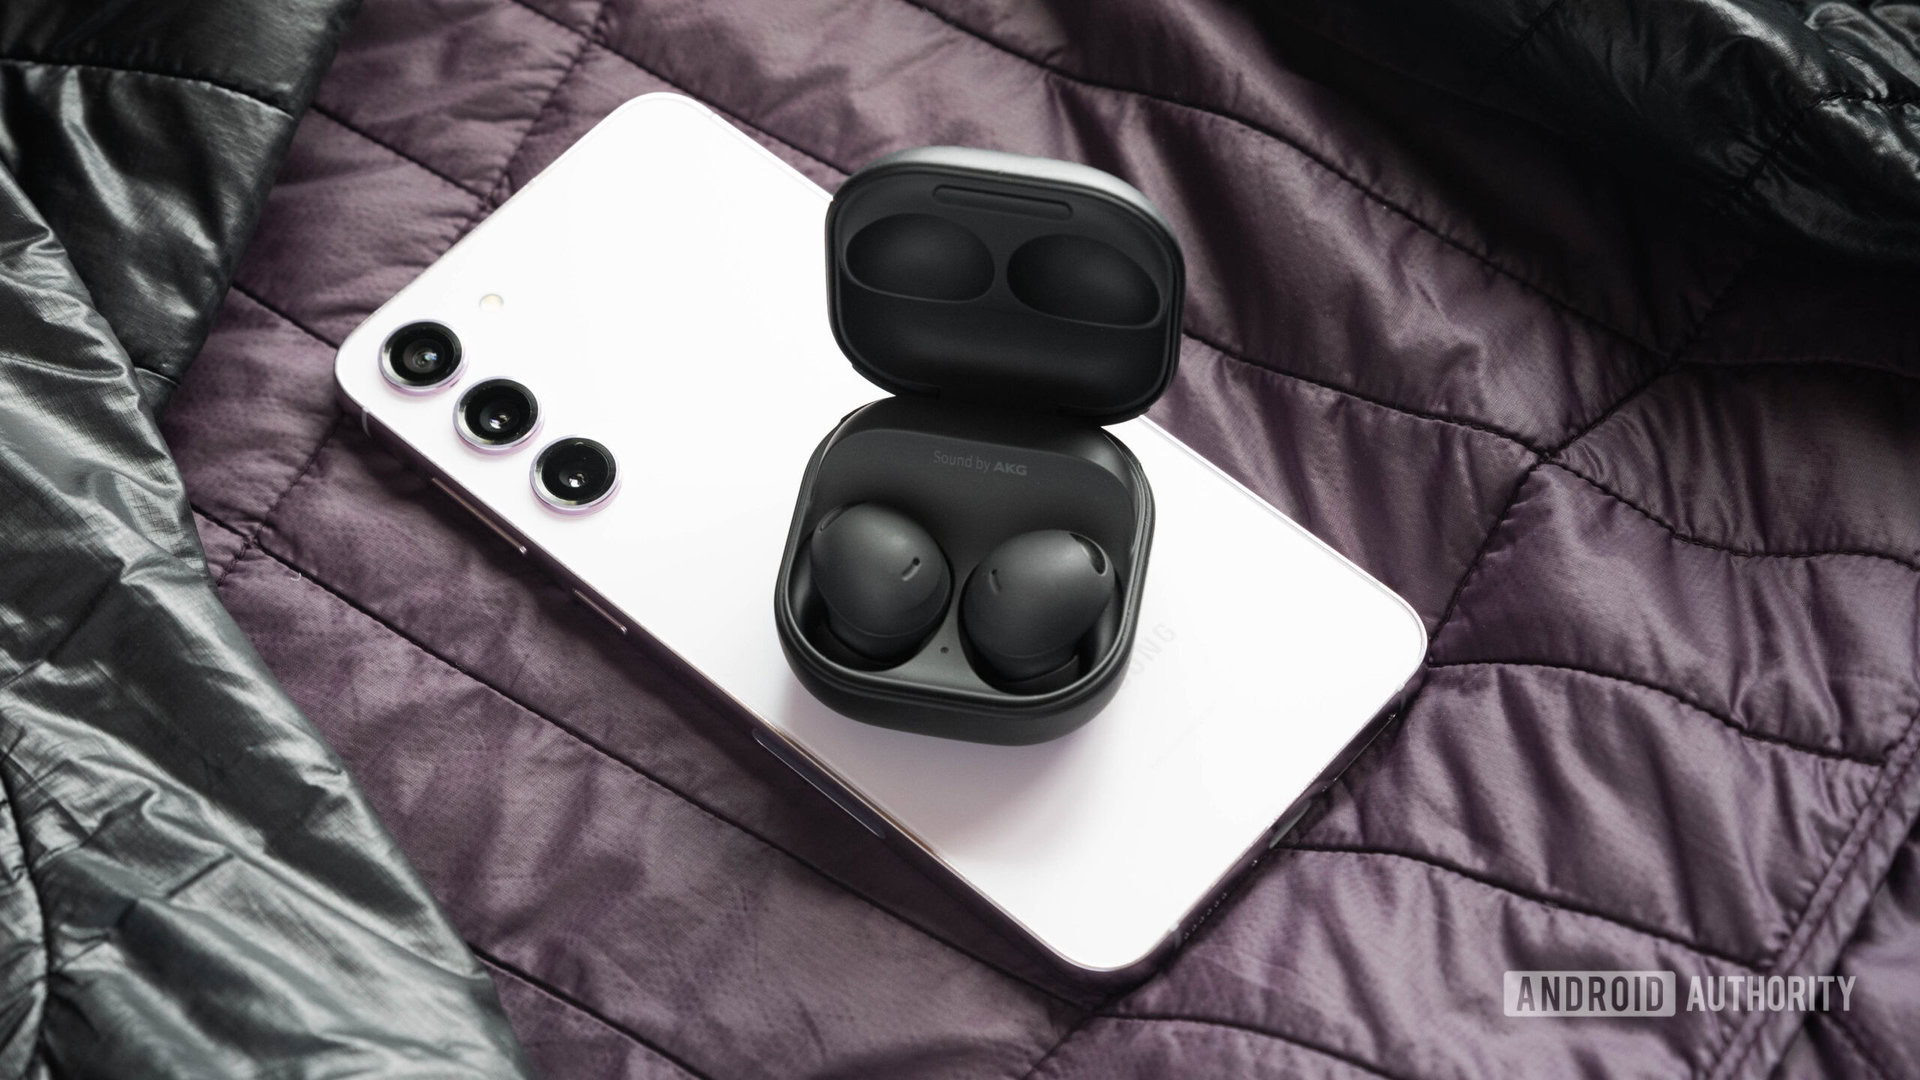 Samsung Galaxy Buds Pro - The Official Samsung Galaxy Site